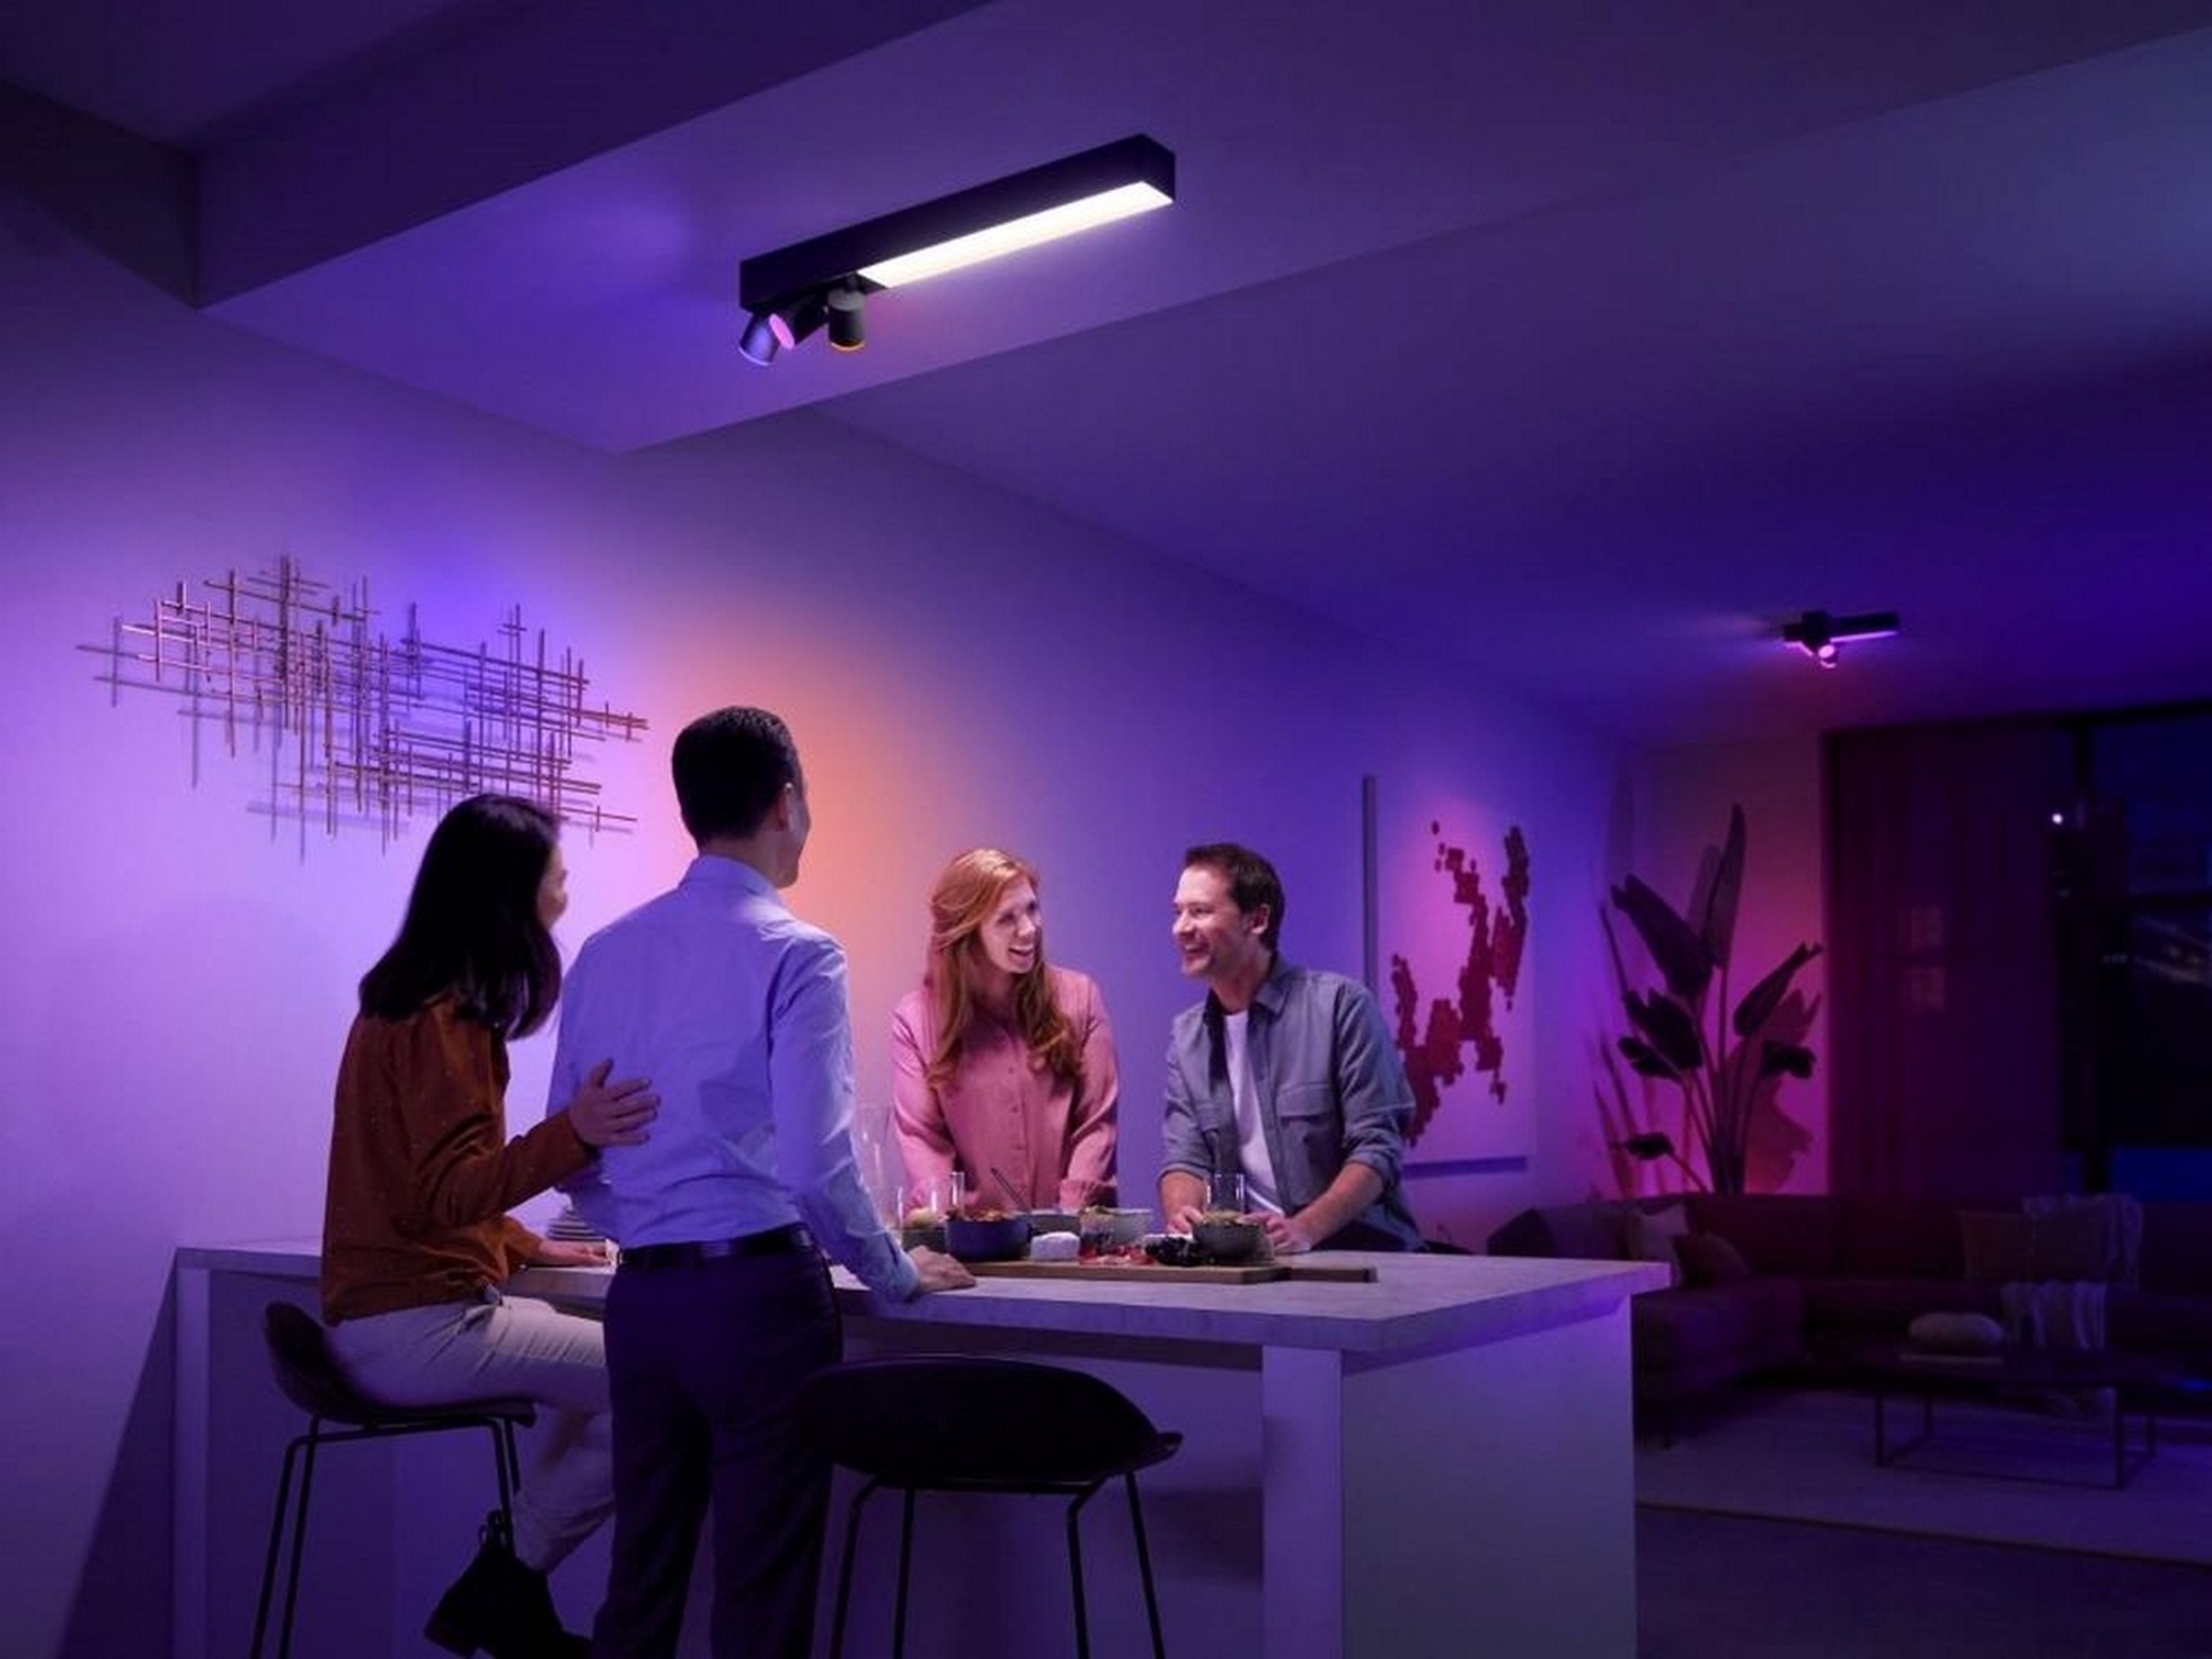 Philips Hue ceiling